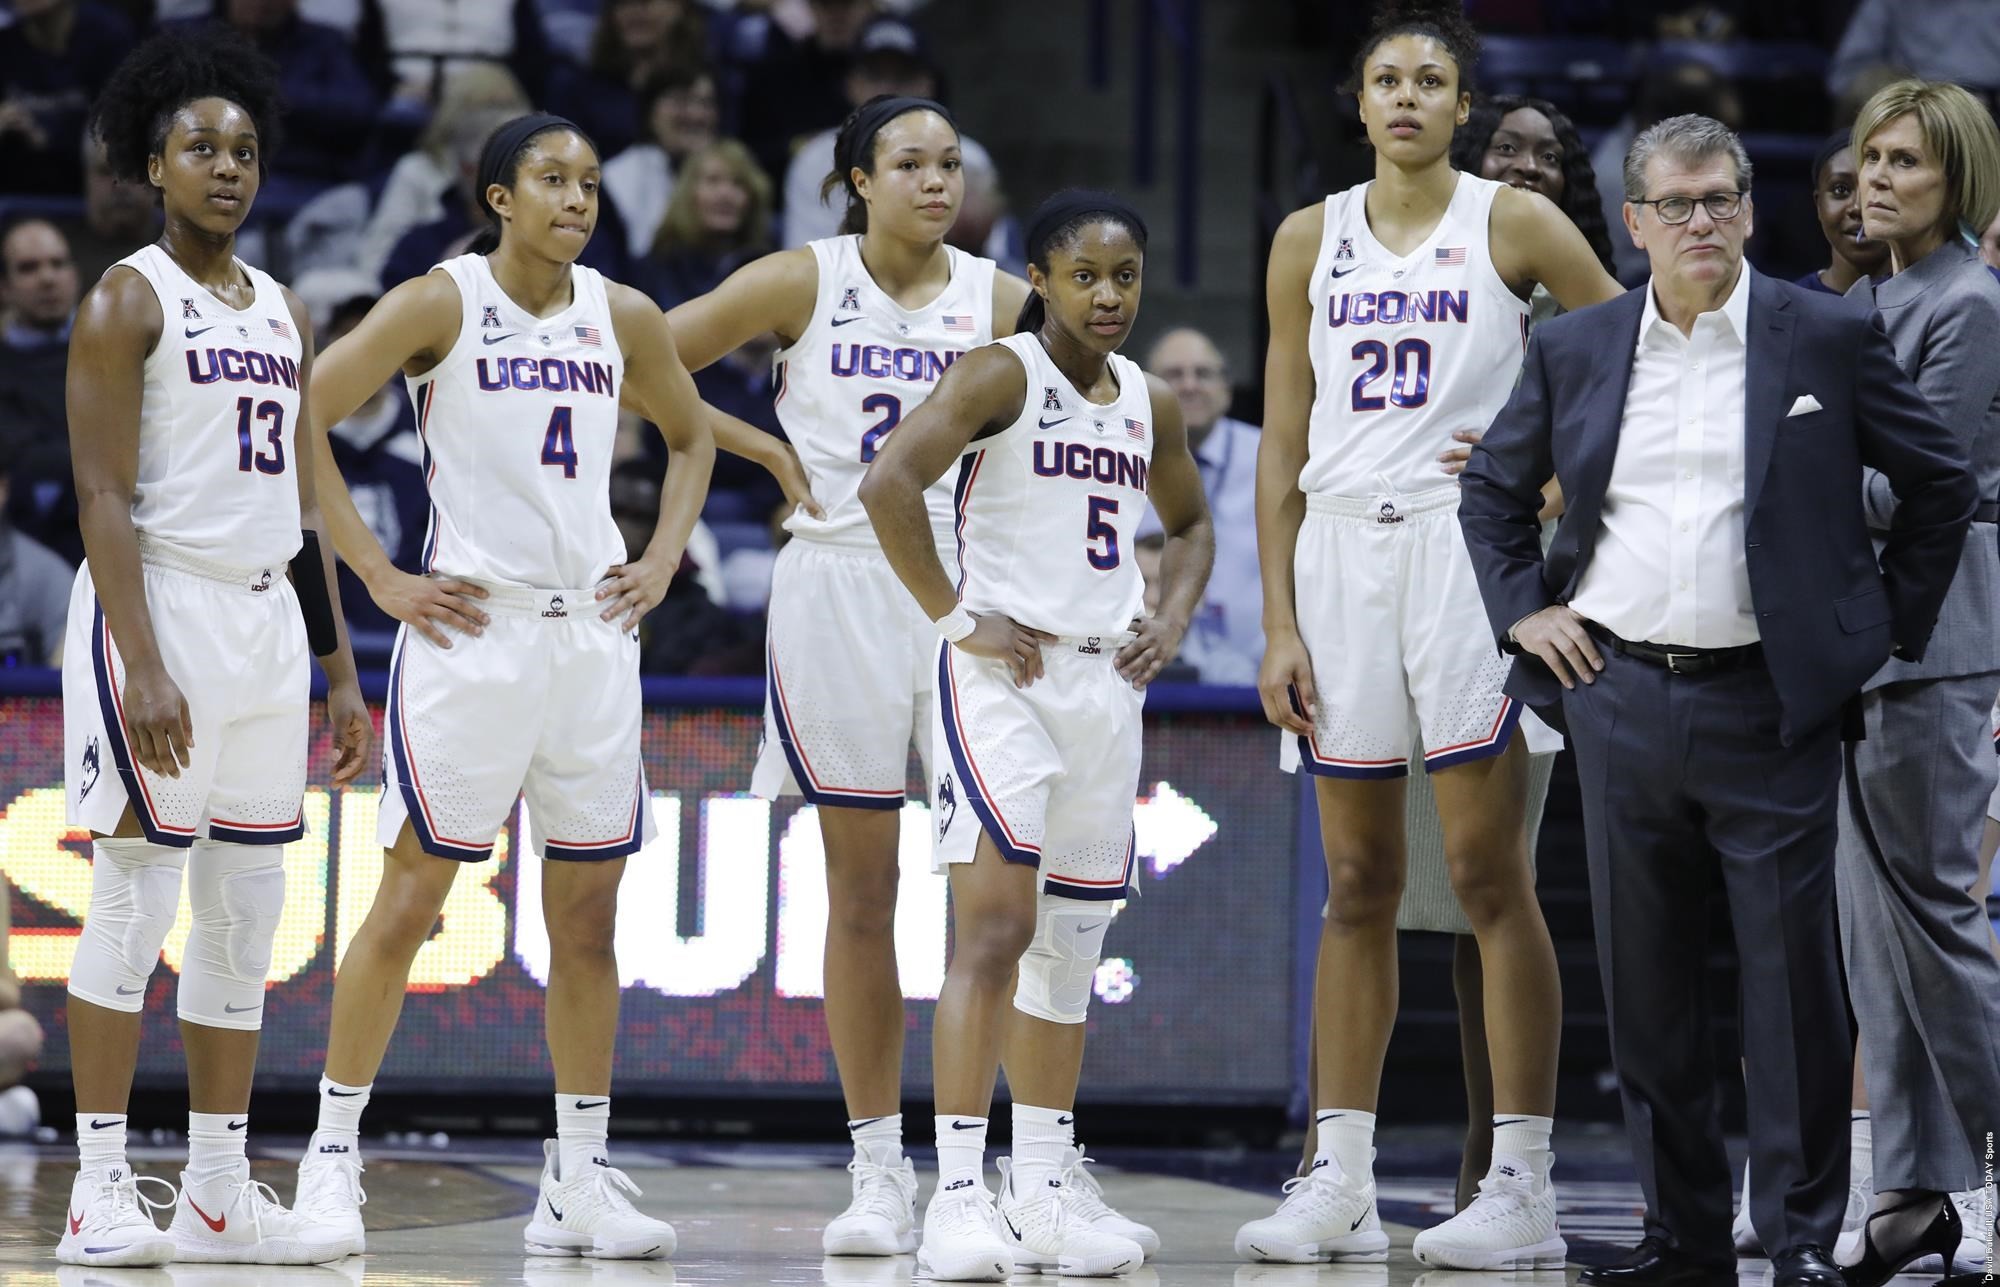 Bracket Announced for 2019 American Athletic Conference Women’s